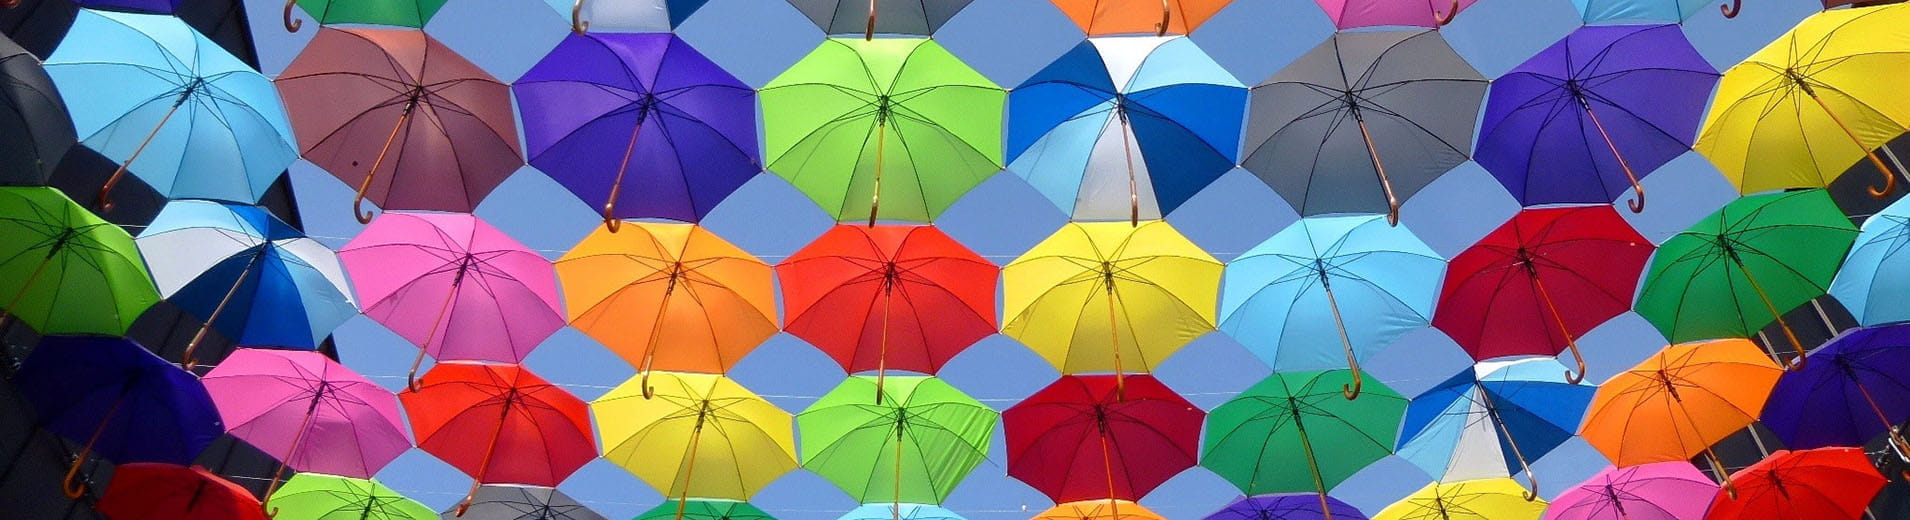 Colorful_umbrellas_hanging_under_the_sky_N_0931